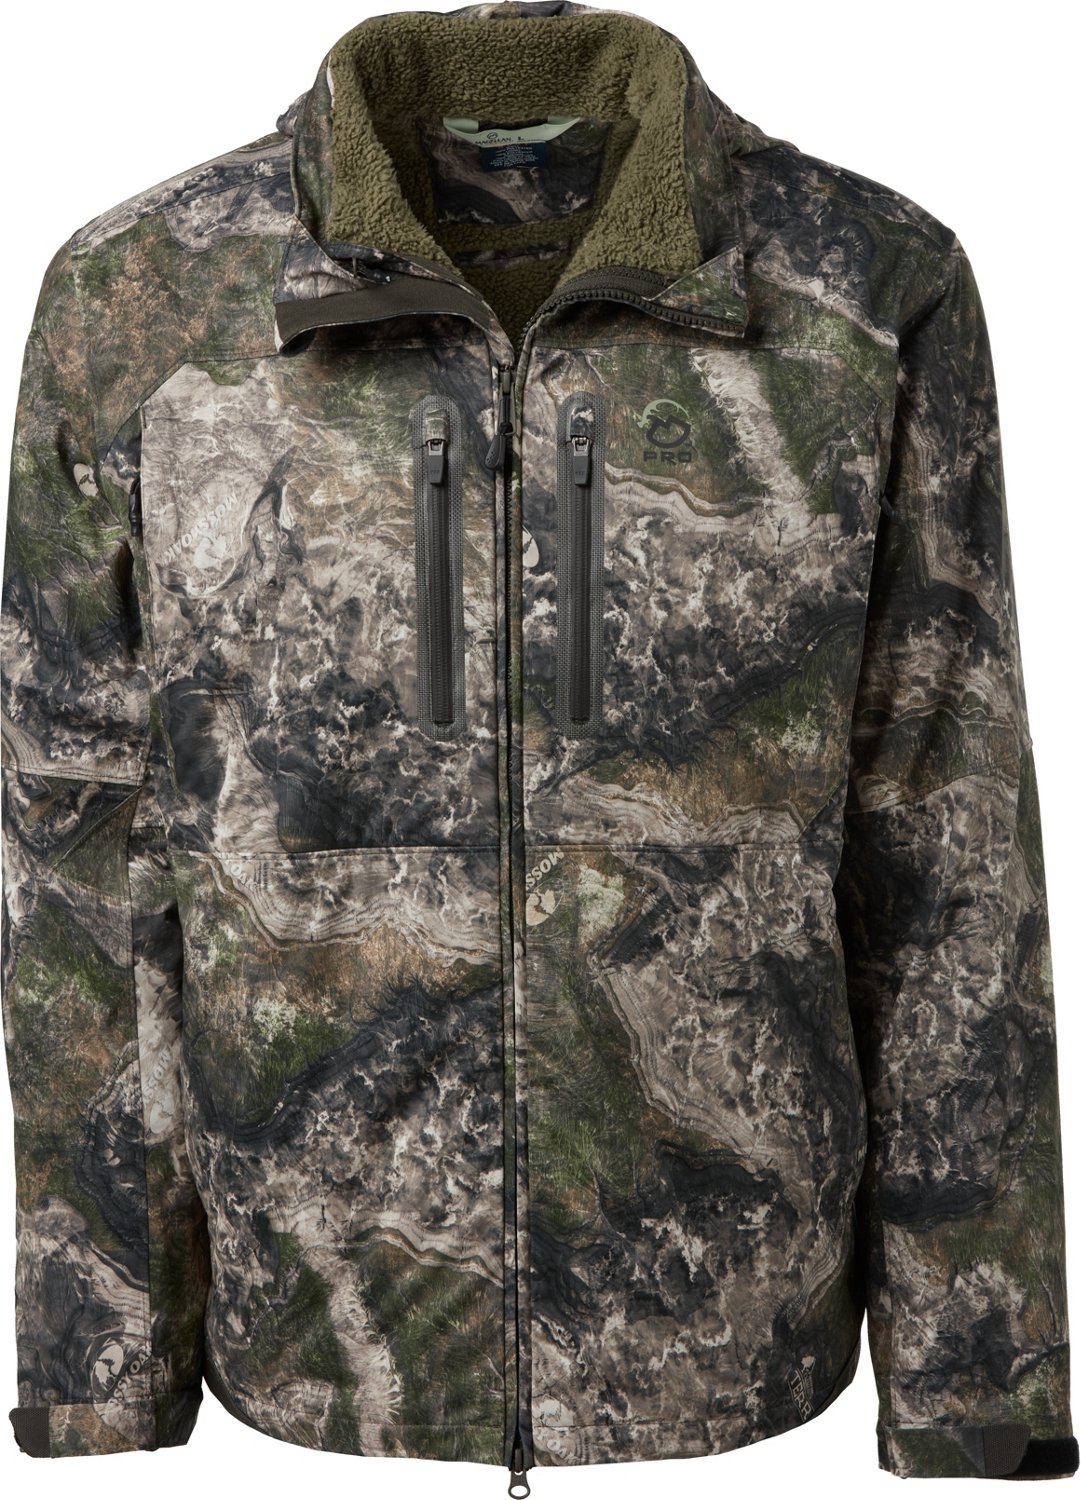 Magellan Outdoors Pro Men's 3-in-1 Systems Camo Jacket